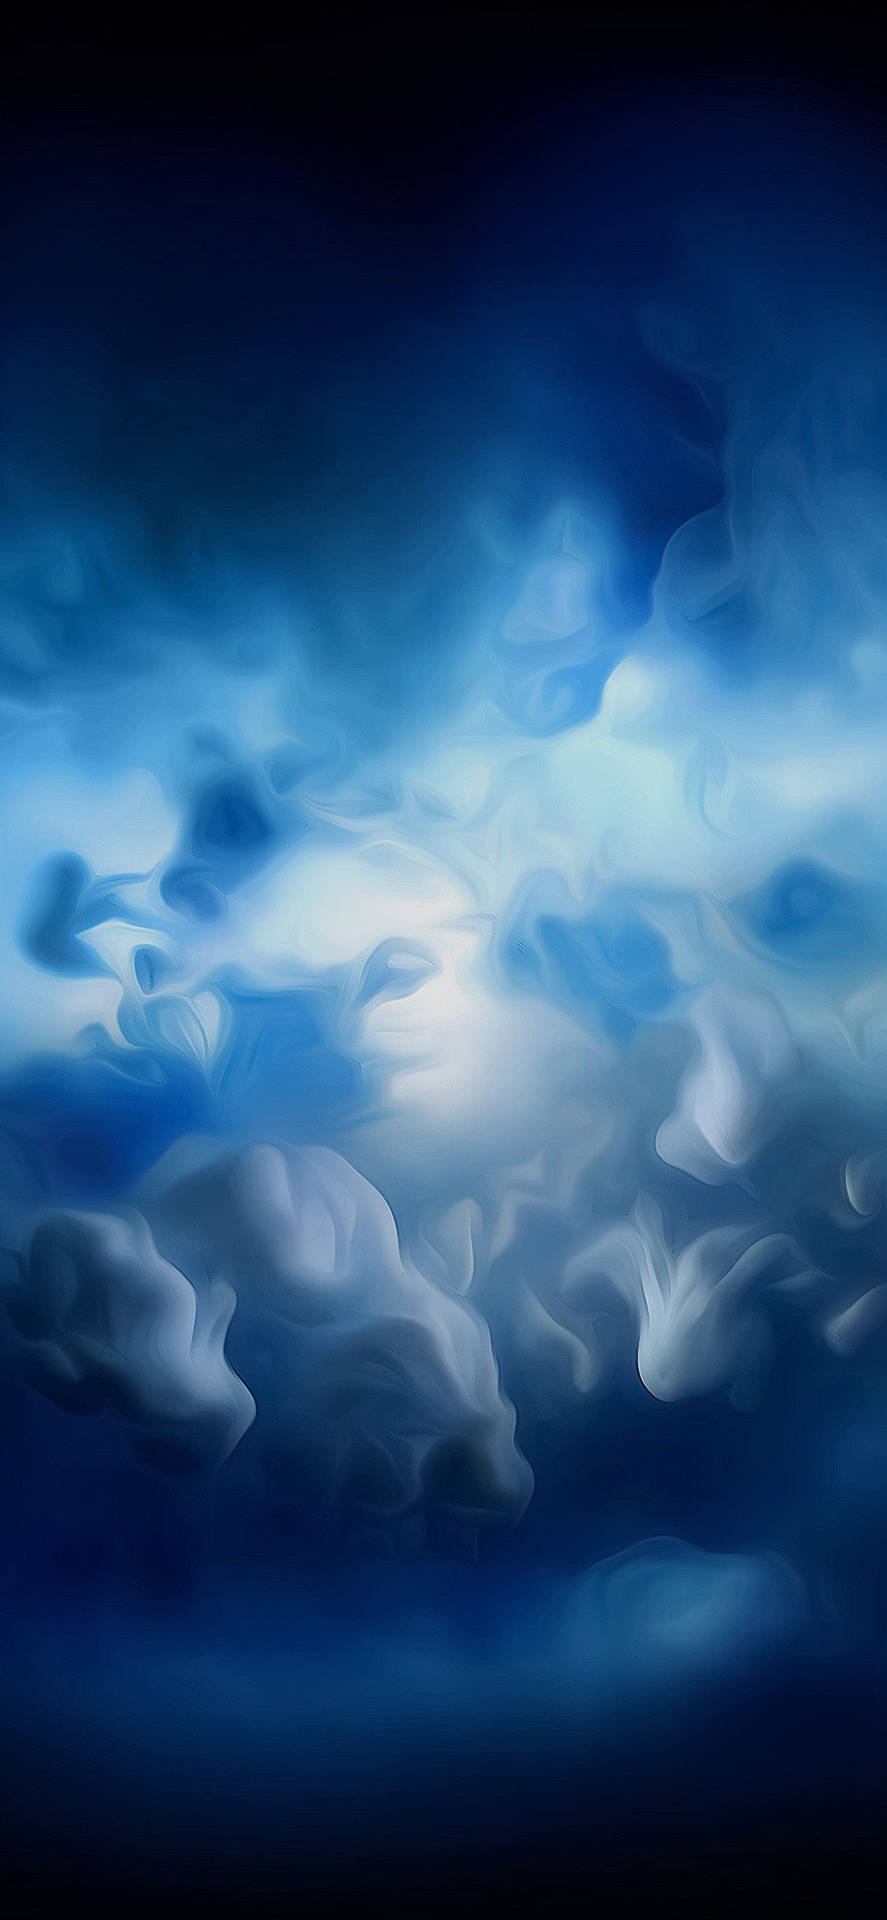 Dynamic Blue Smoke Clouds Picture